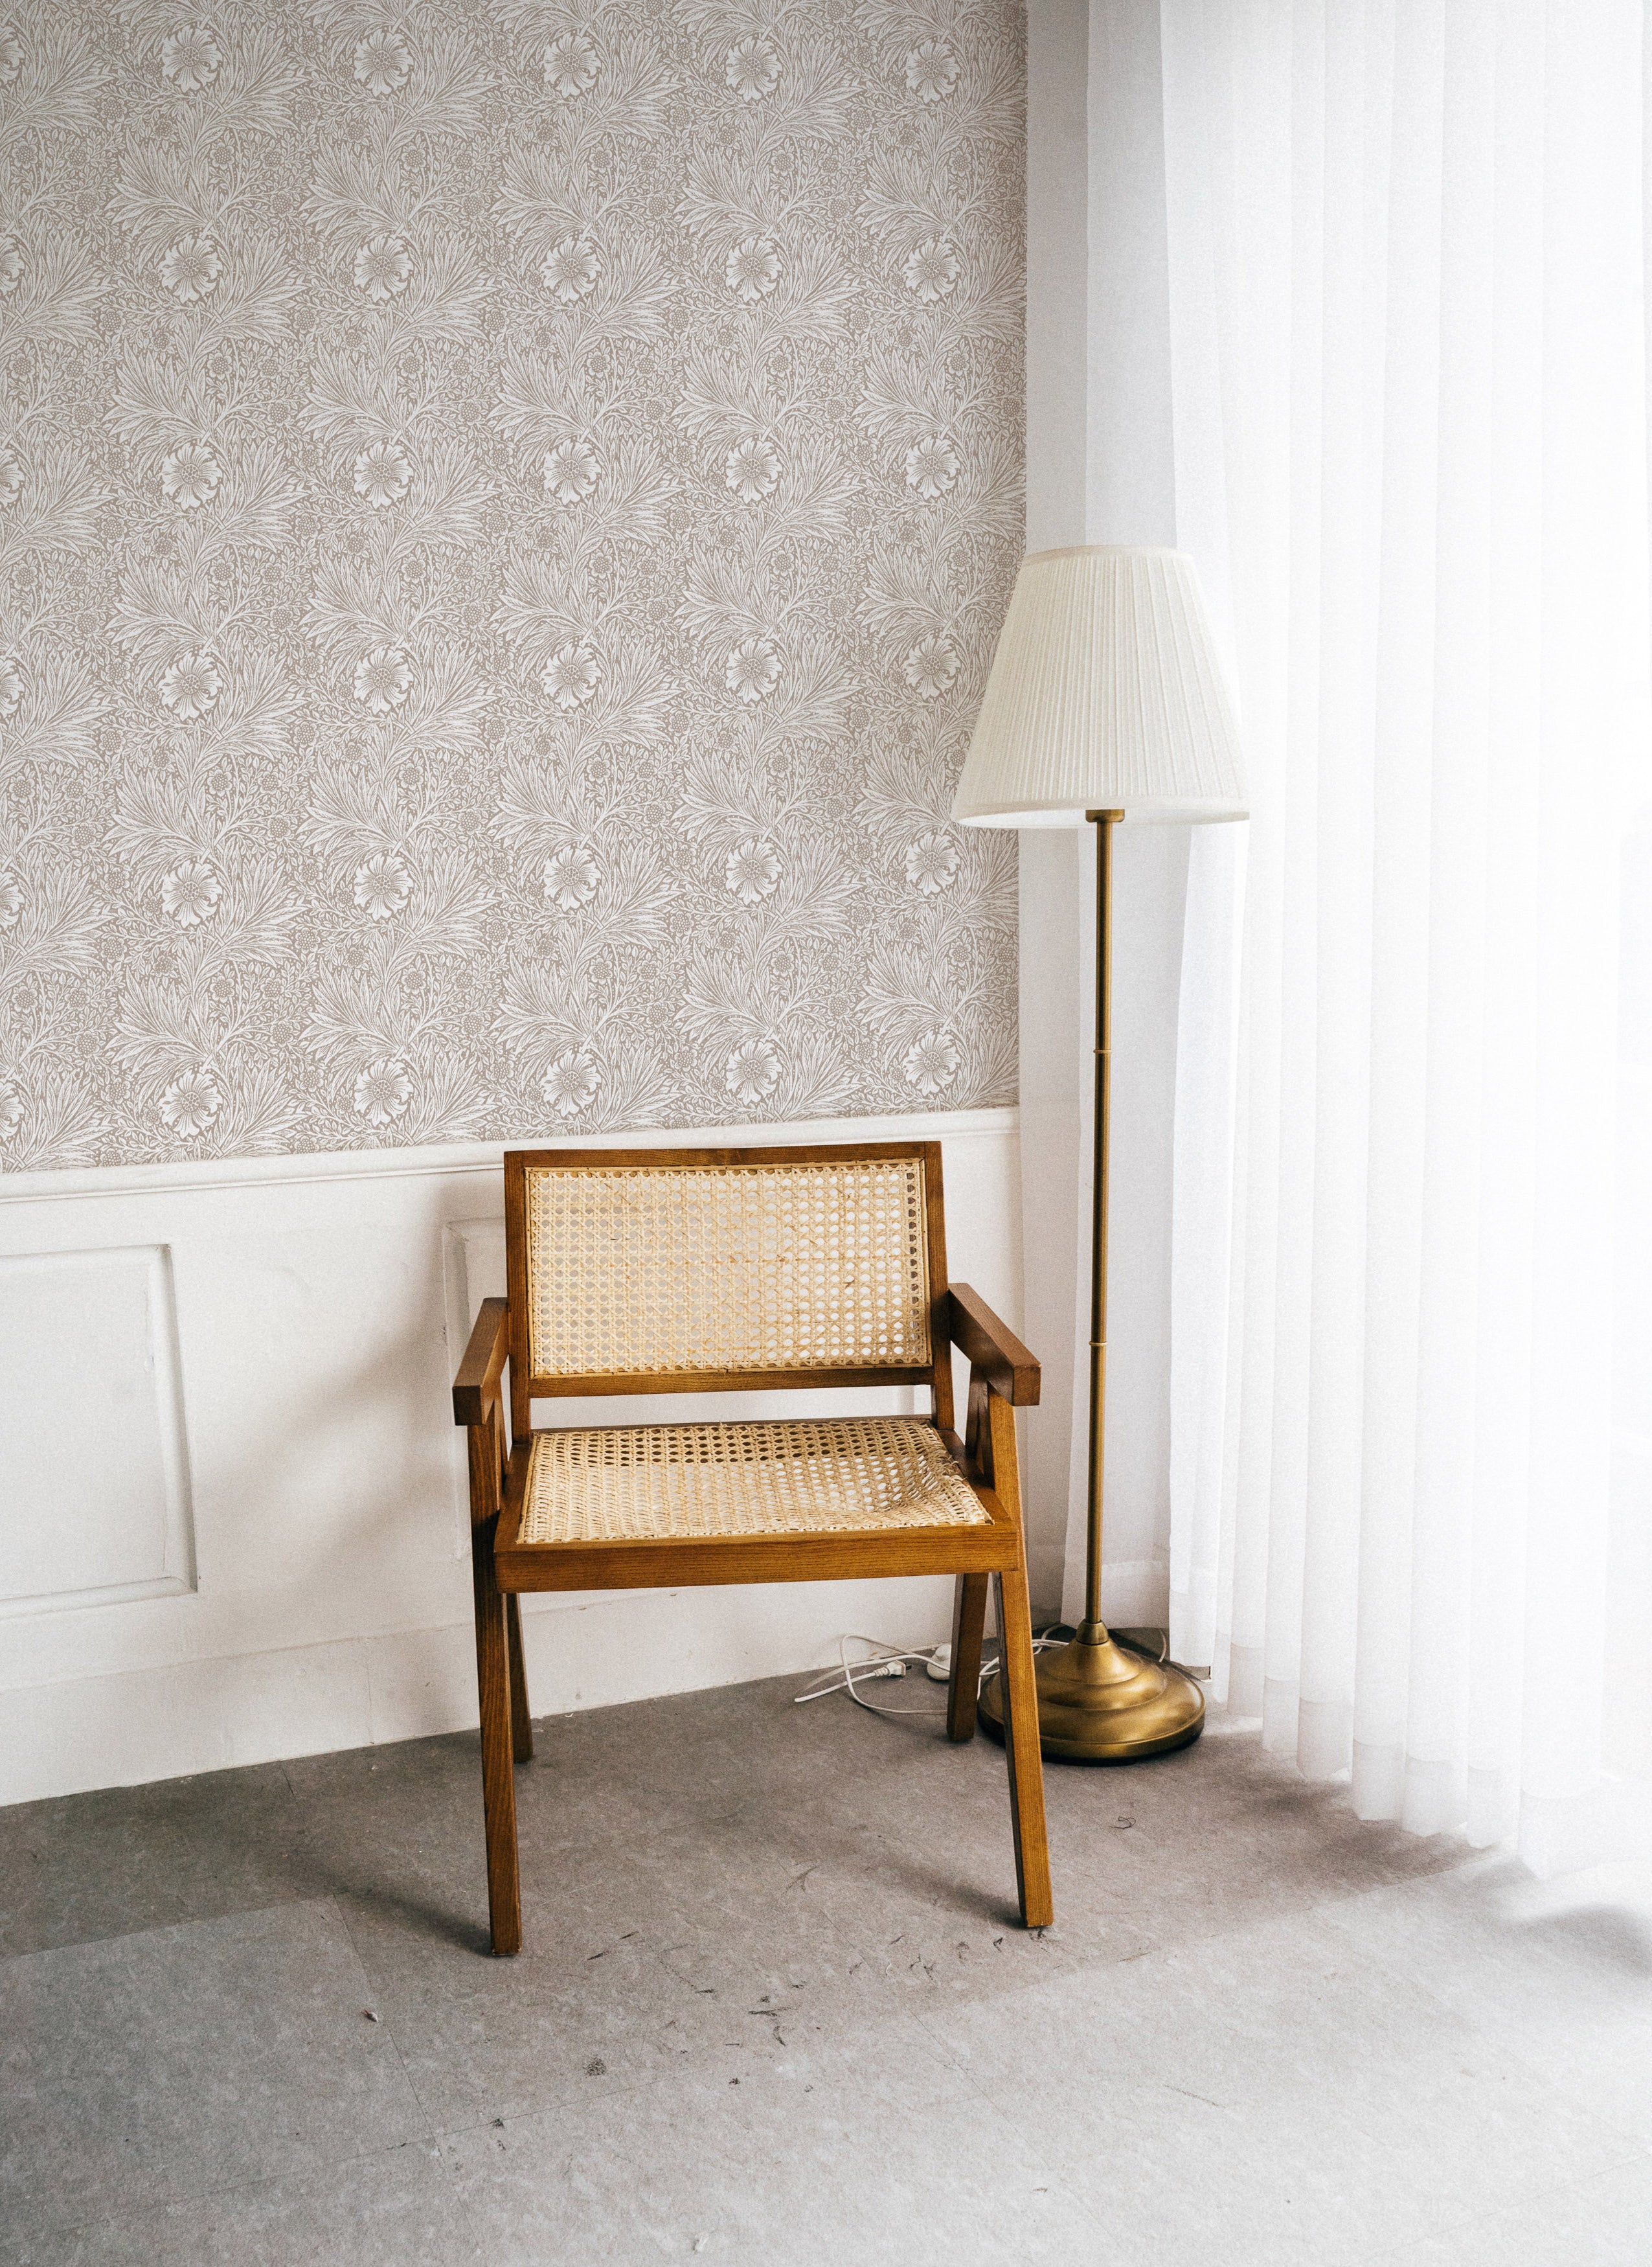 Minimalistic and serene workspace accentuated by Timeless Floral Wallpaper with delicate beige floral motifs, paired with a simple wooden chair and floor lamp